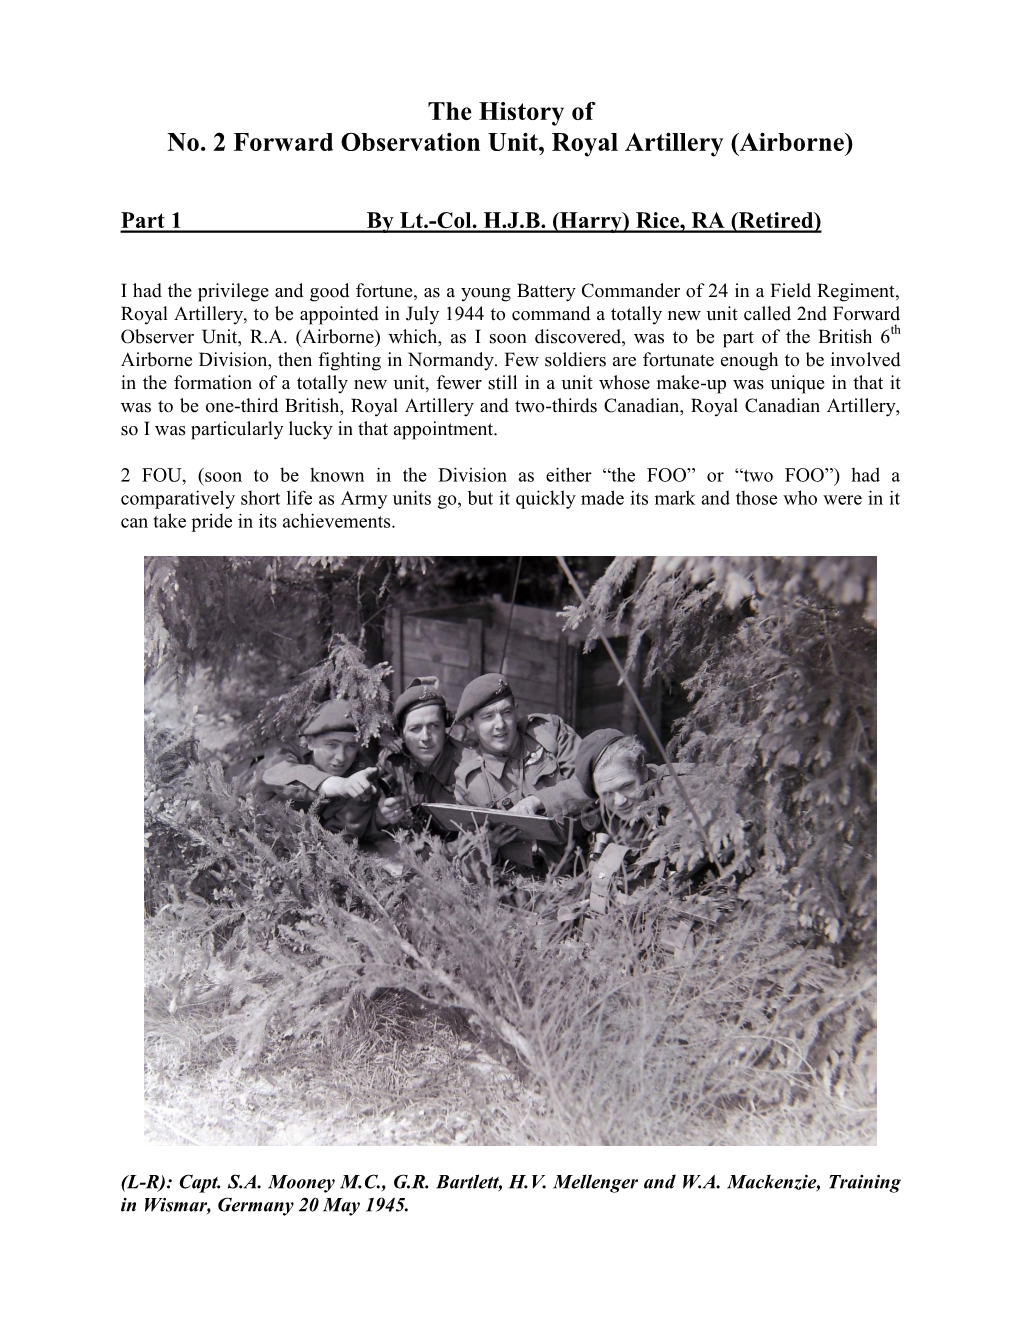 The History of No. 2 Forward Observation Unit, Royal Artillery (Airborne)